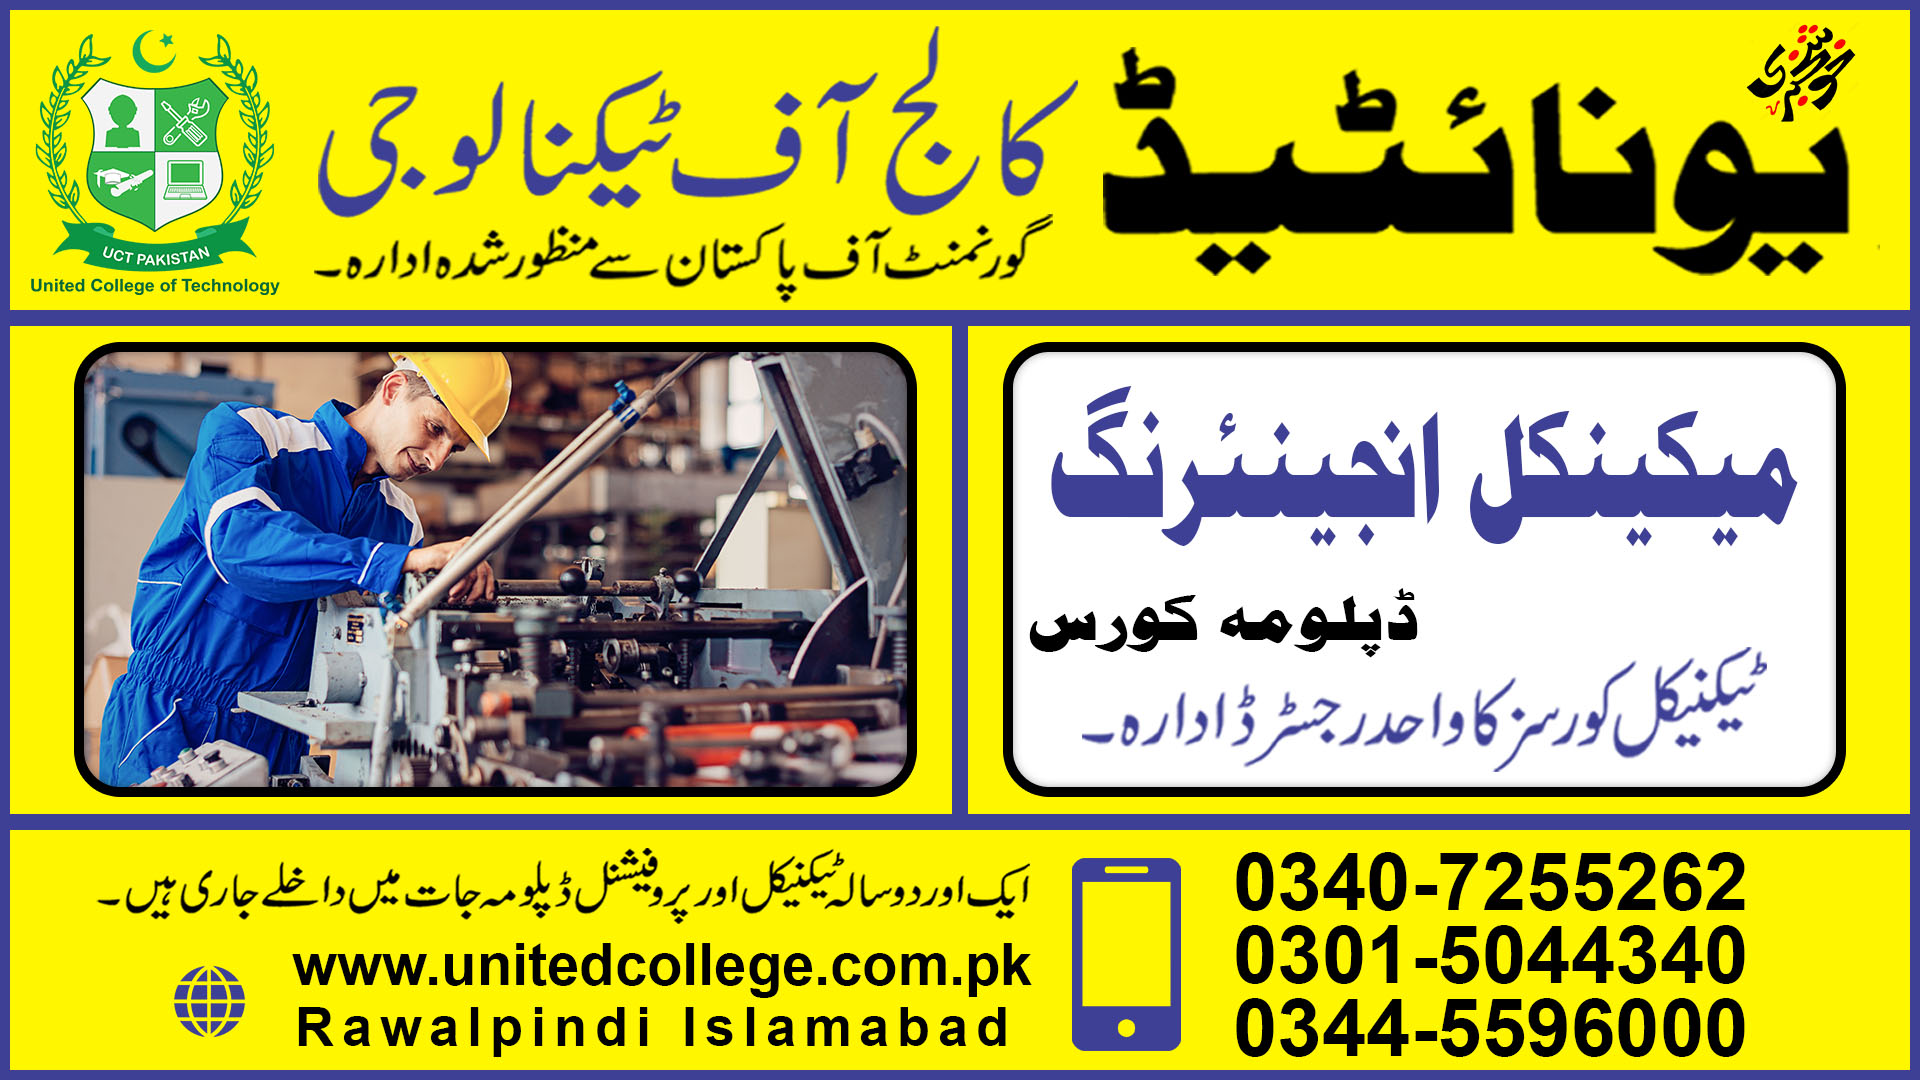 MECHANICAL ENGINEERING COURSE